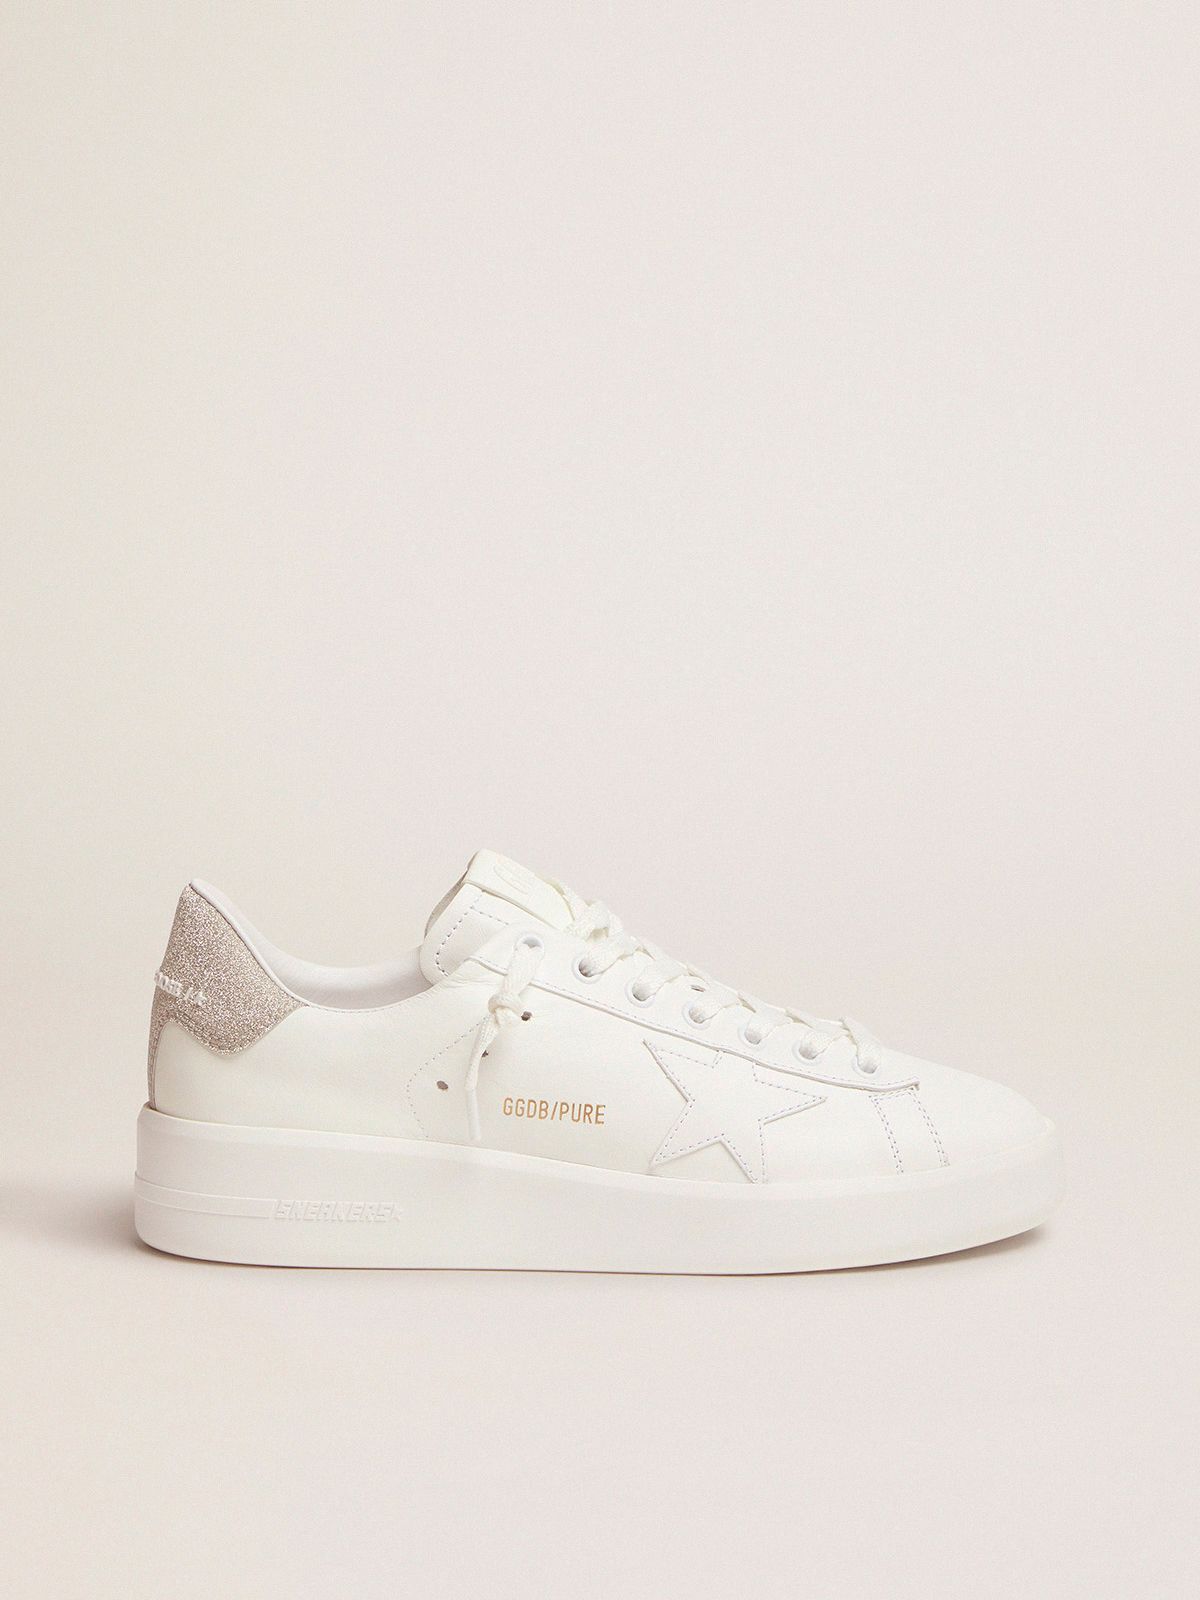 golden goose tab white leather sneakers champagne Purestar in heel with glitter